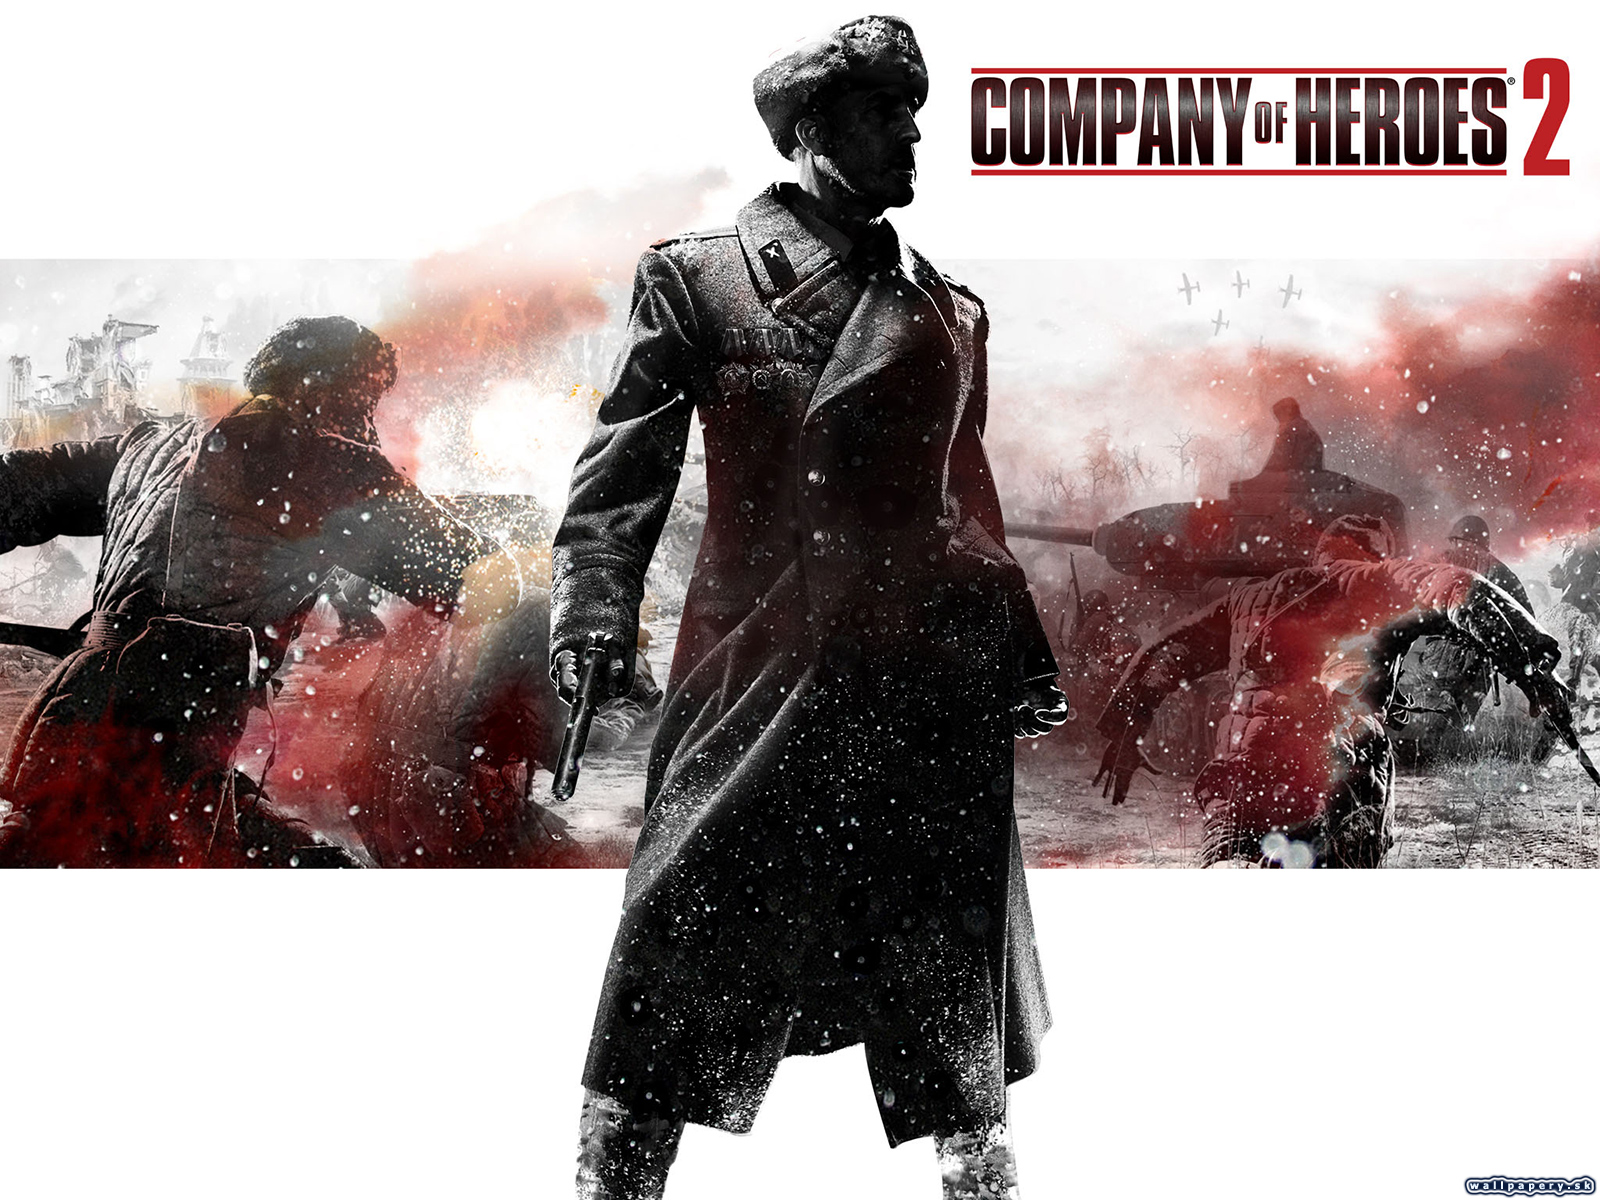 Company of Heroes 2 - wallpaper 2